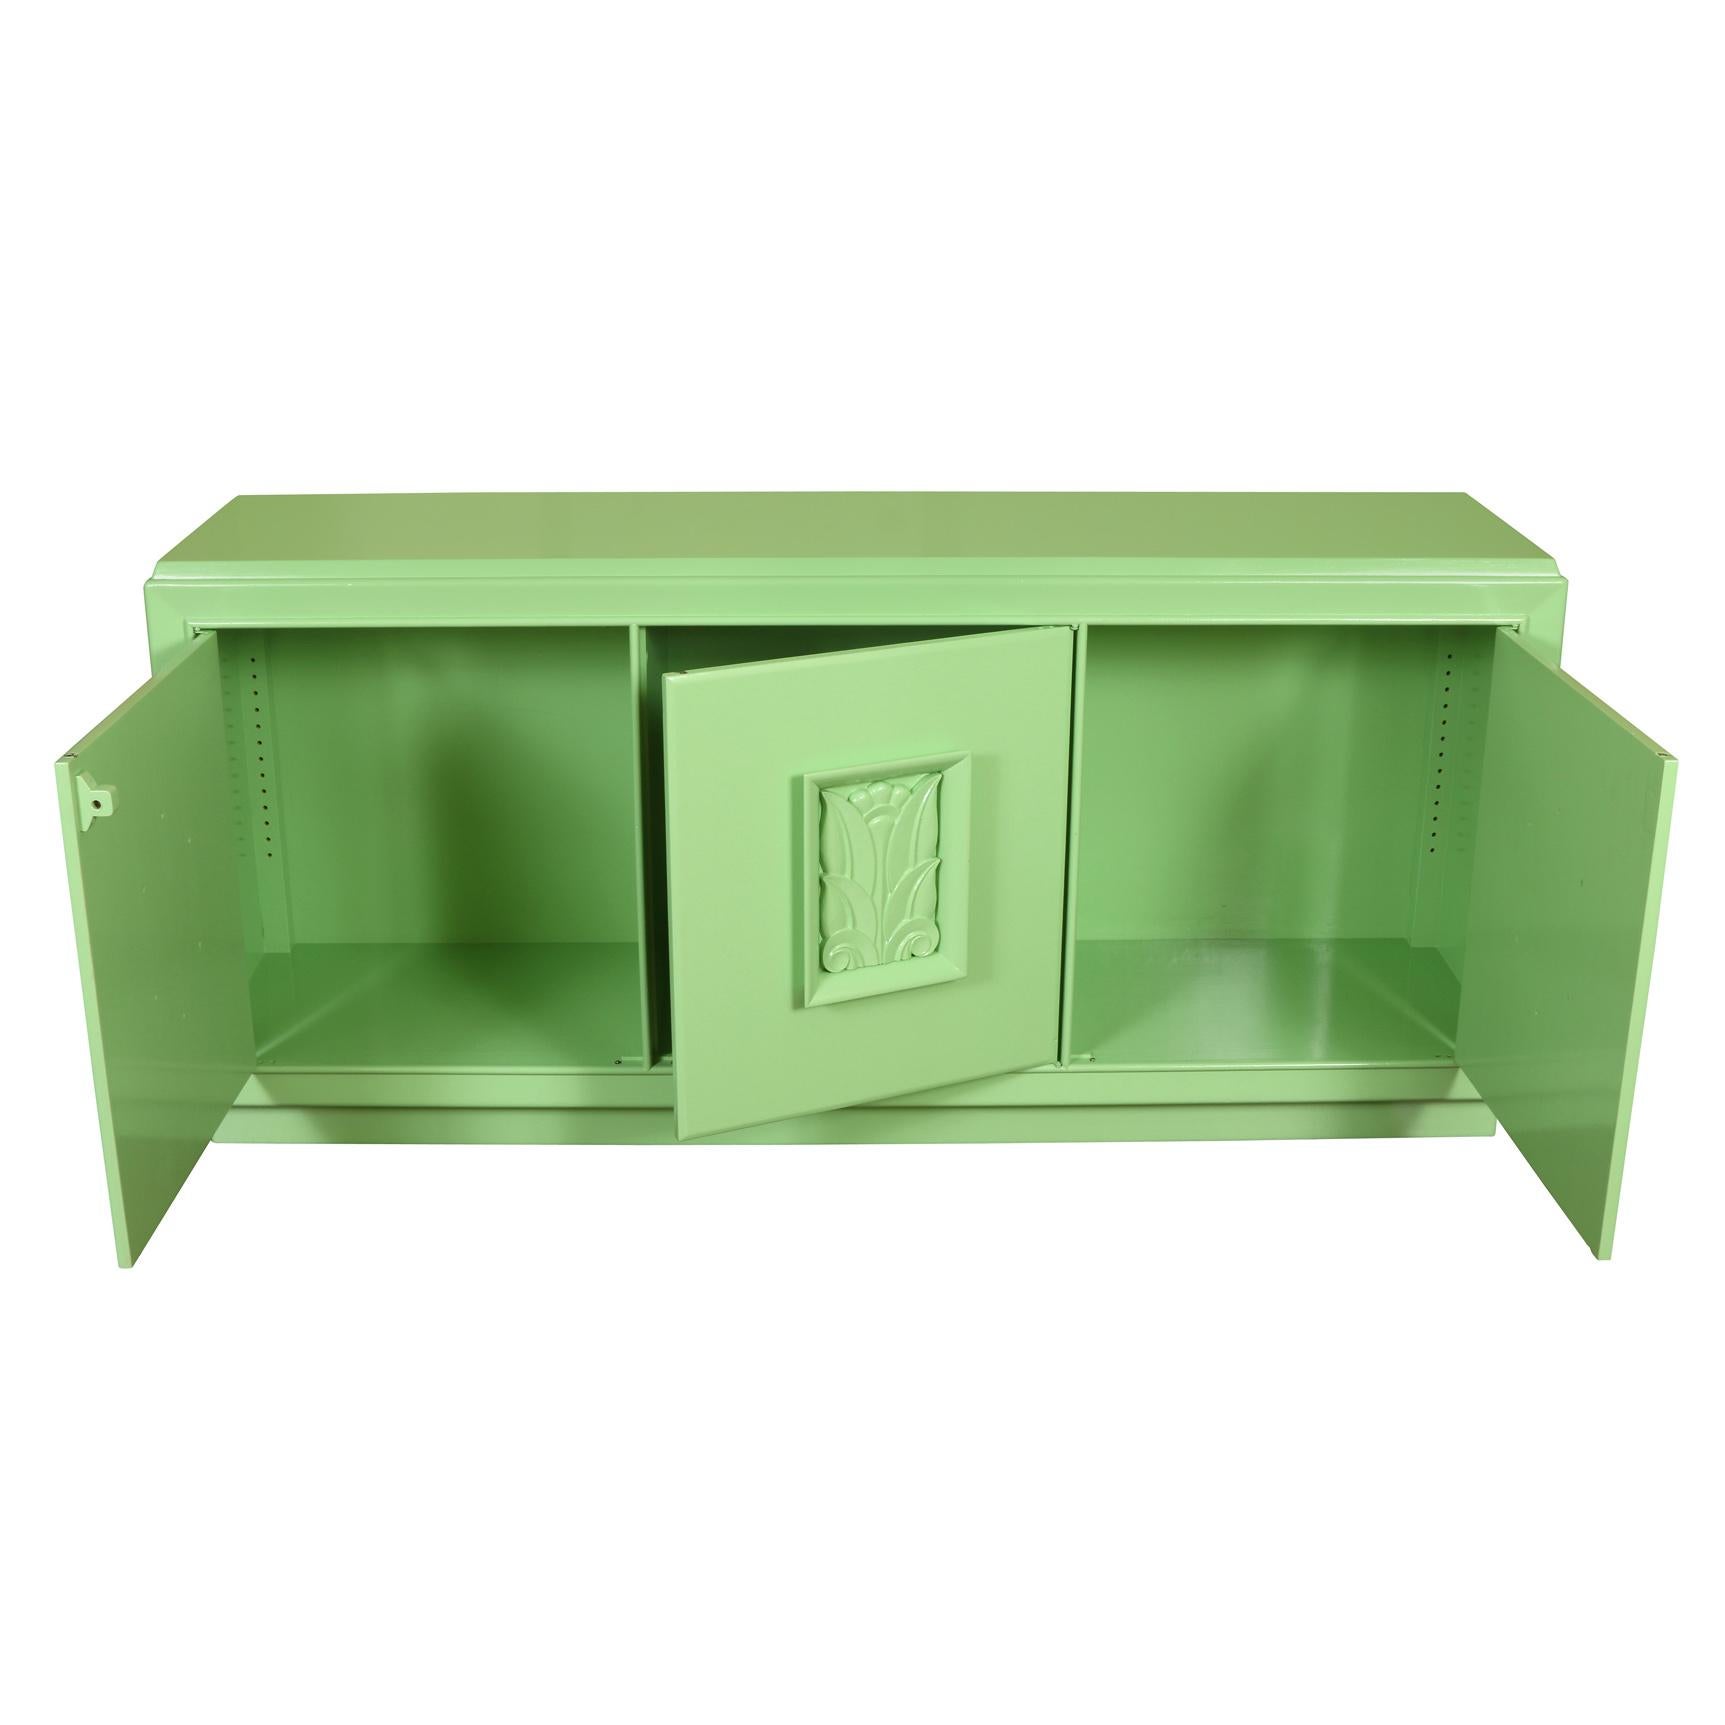 Mid-Century Modern three door green lacquered credenza. Each door is decorated with carved palm leaf relief.